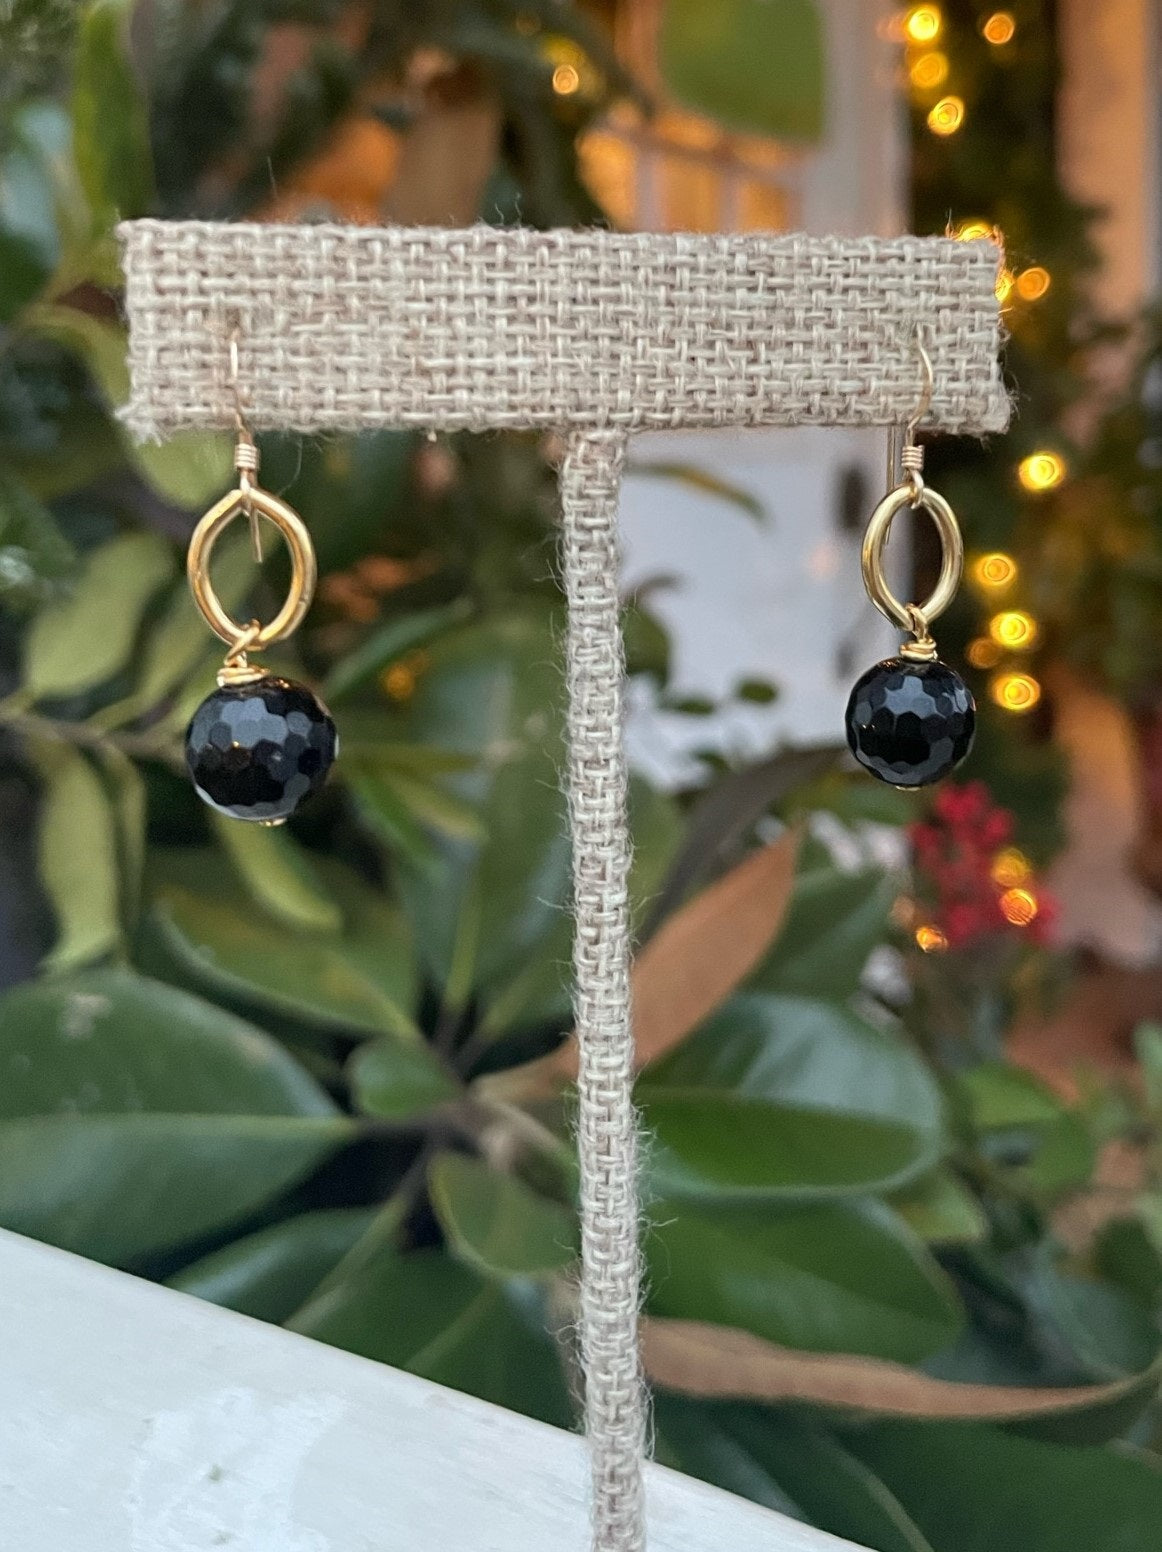 These single bead earrings are just the right touch when you need a little color, but a smaller earring! They have gold hardware and have a open circle above the colored bead. A simple but lovely pair of earrings!